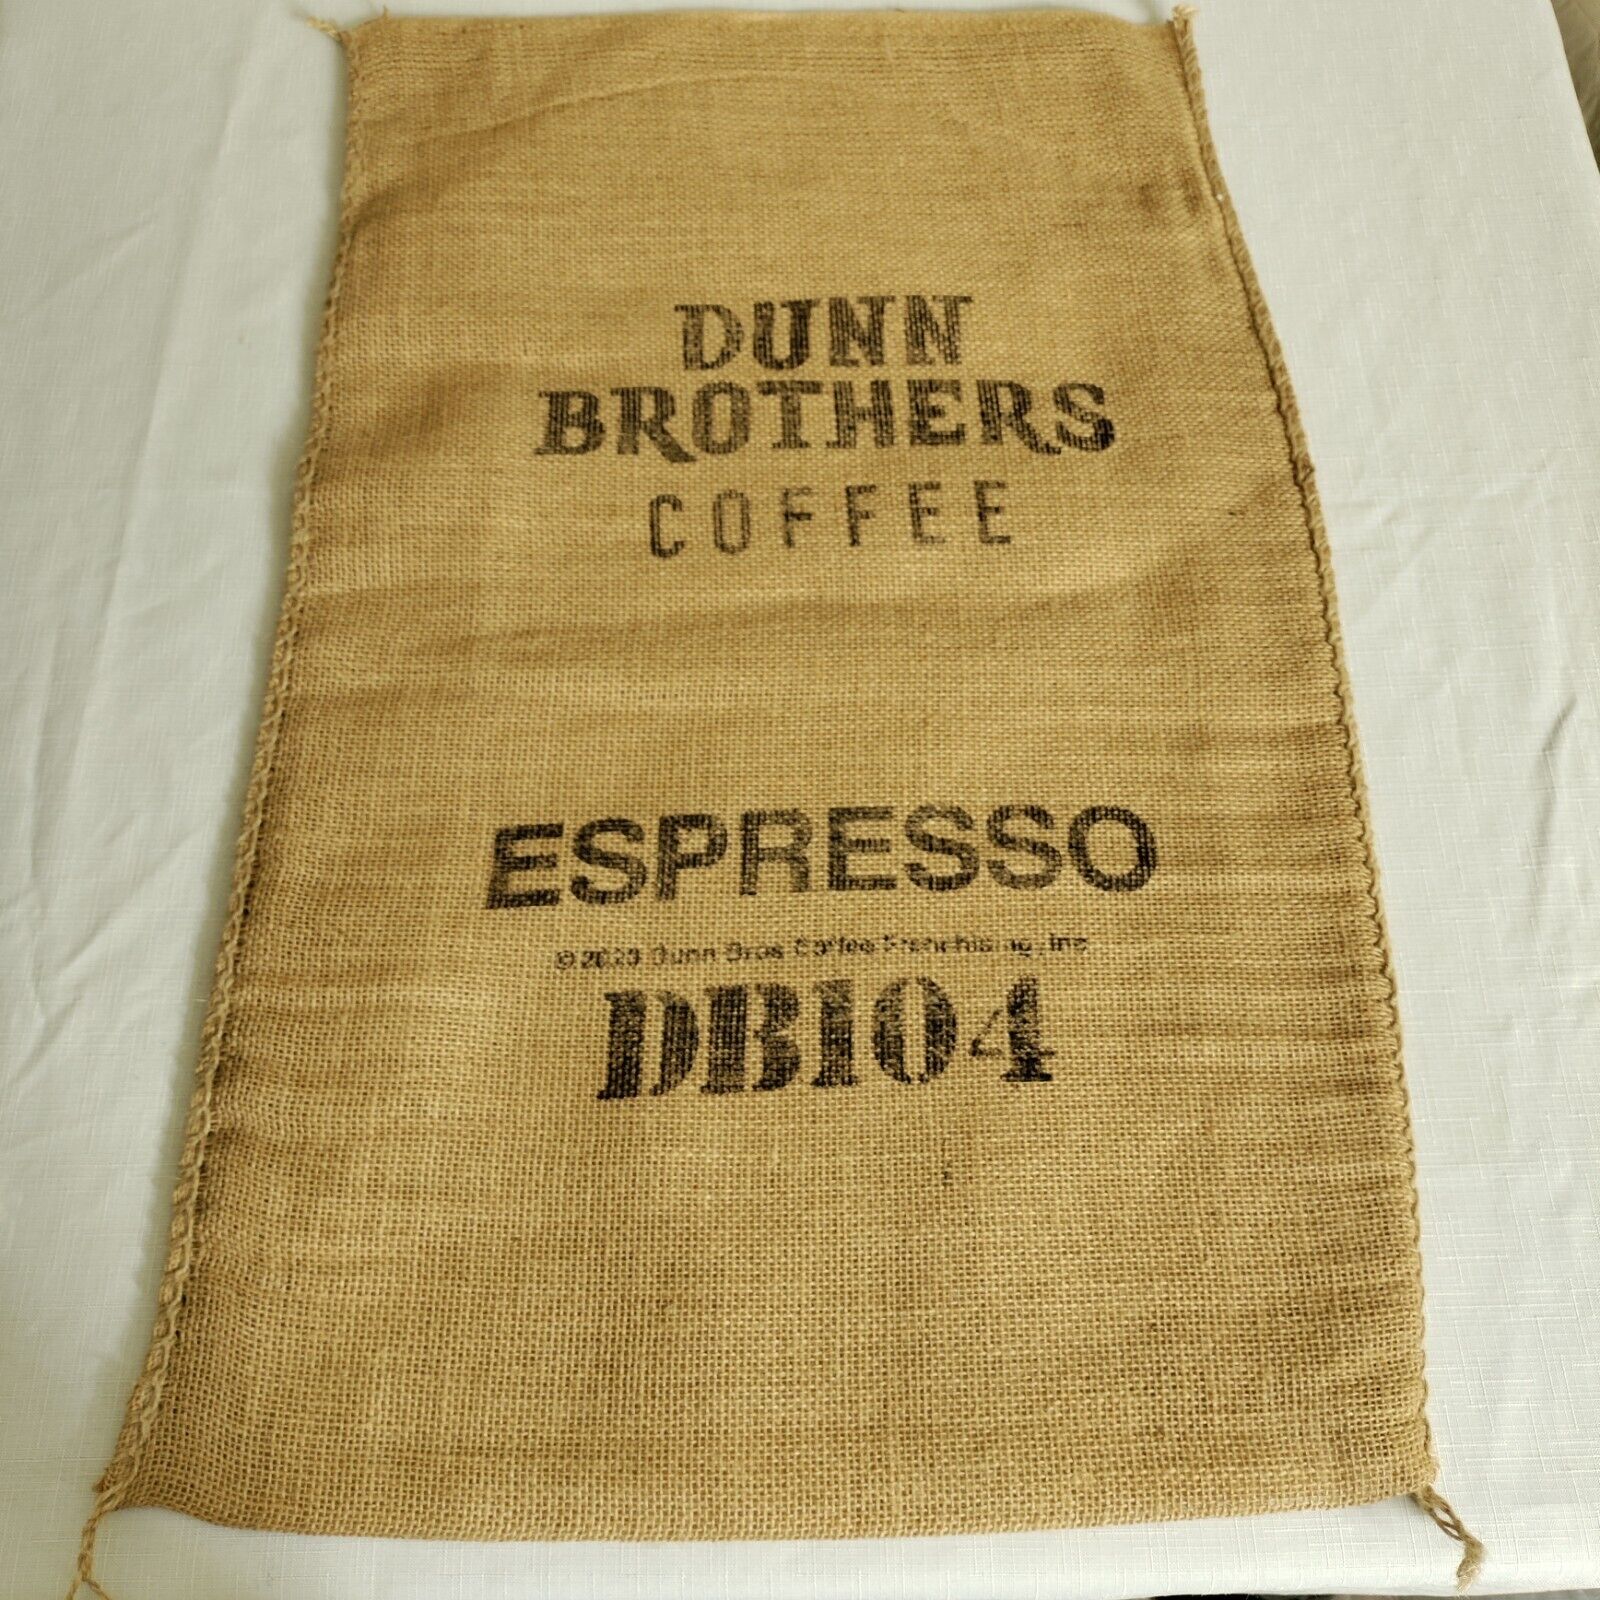 Dunn Brothers Espresso Coffee Bean Burlap Bag Approximately 29.5”x 18” 